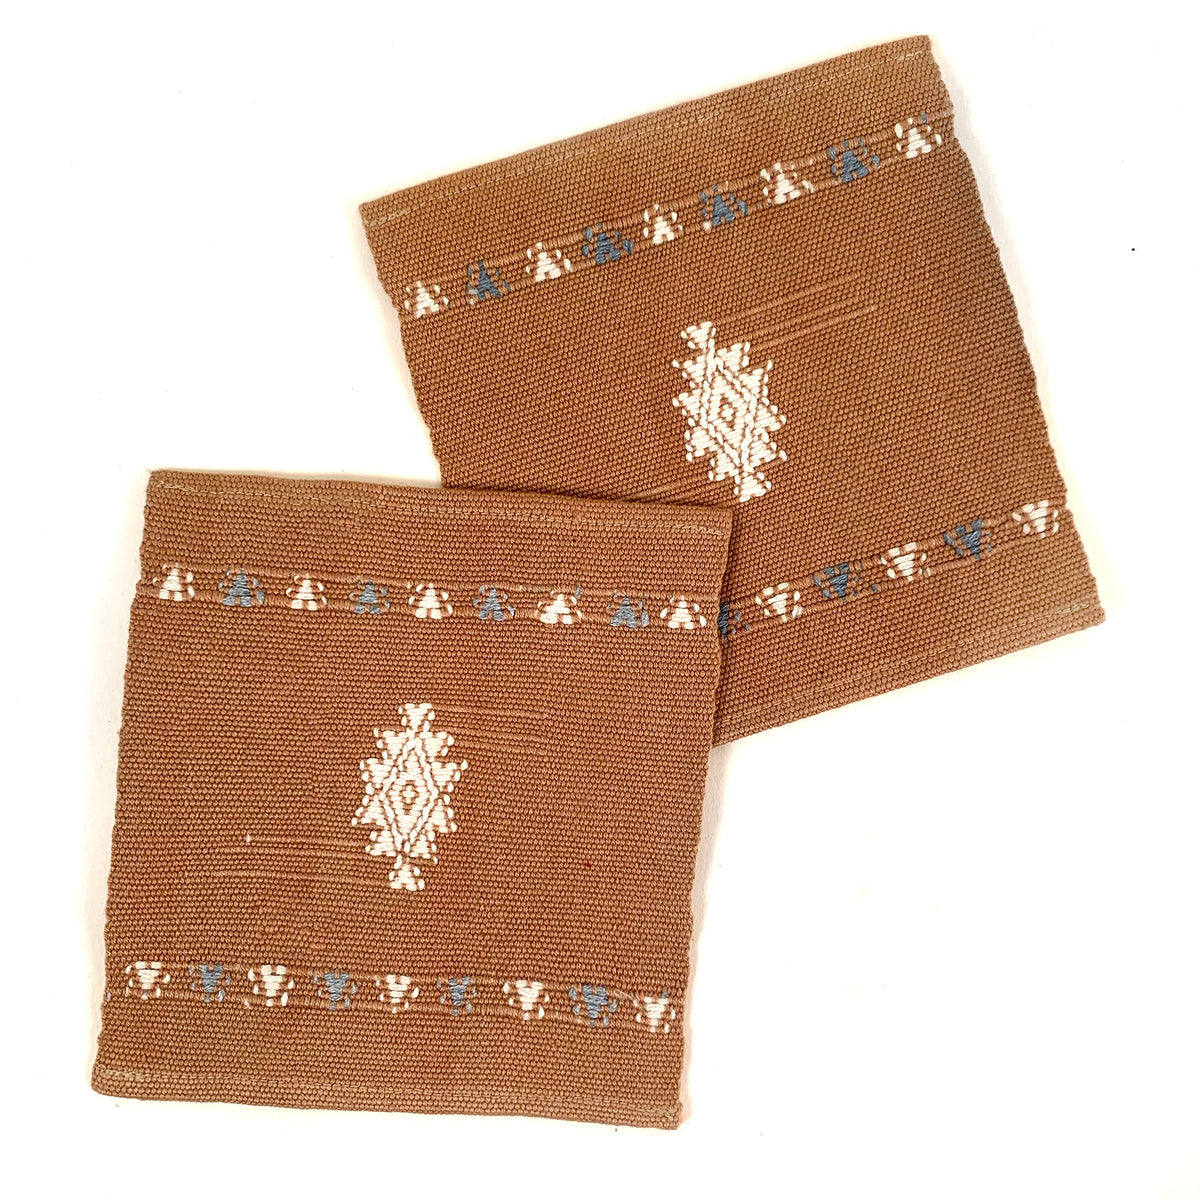 Handwoven brocade coaster with Mayan star design, brown background color